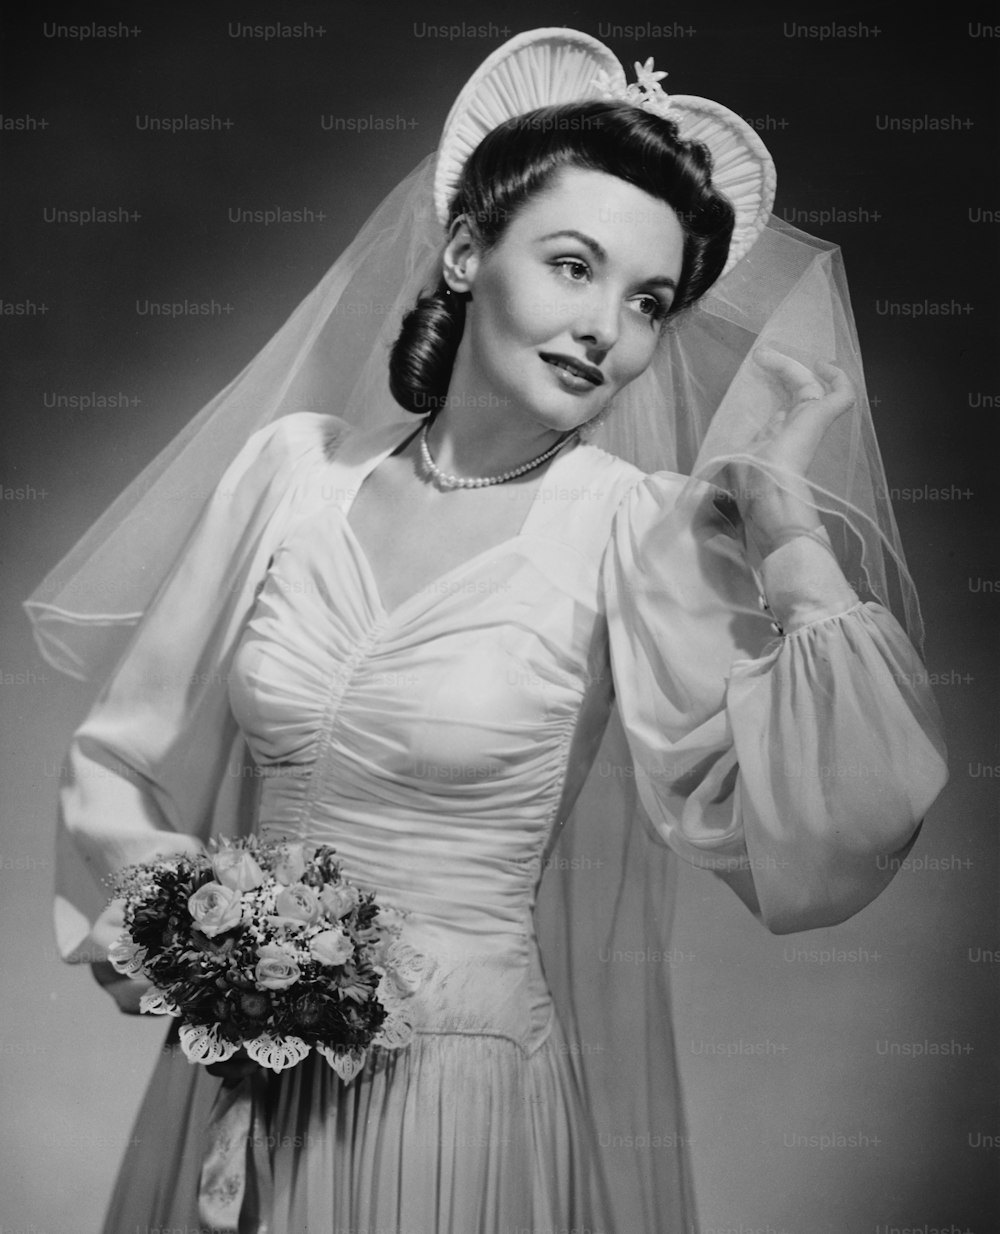 A young bride with a veil and bouquet, circa 1940.  (Photo by George Marks/Retrofile/Getty Images)